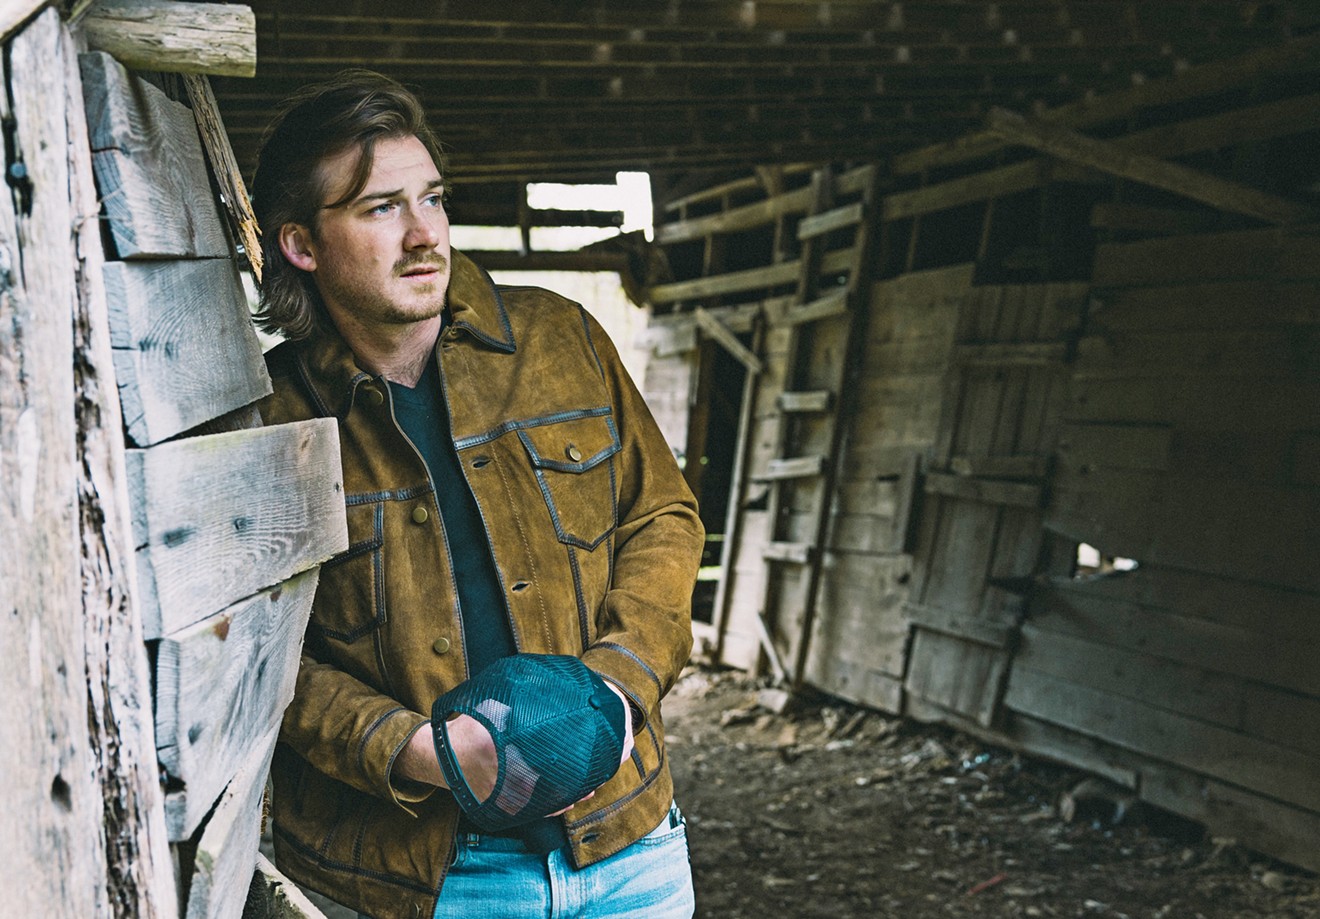 Morgan Wallen is scheduled to perform on Wednesday and Thursday at Chase Field.